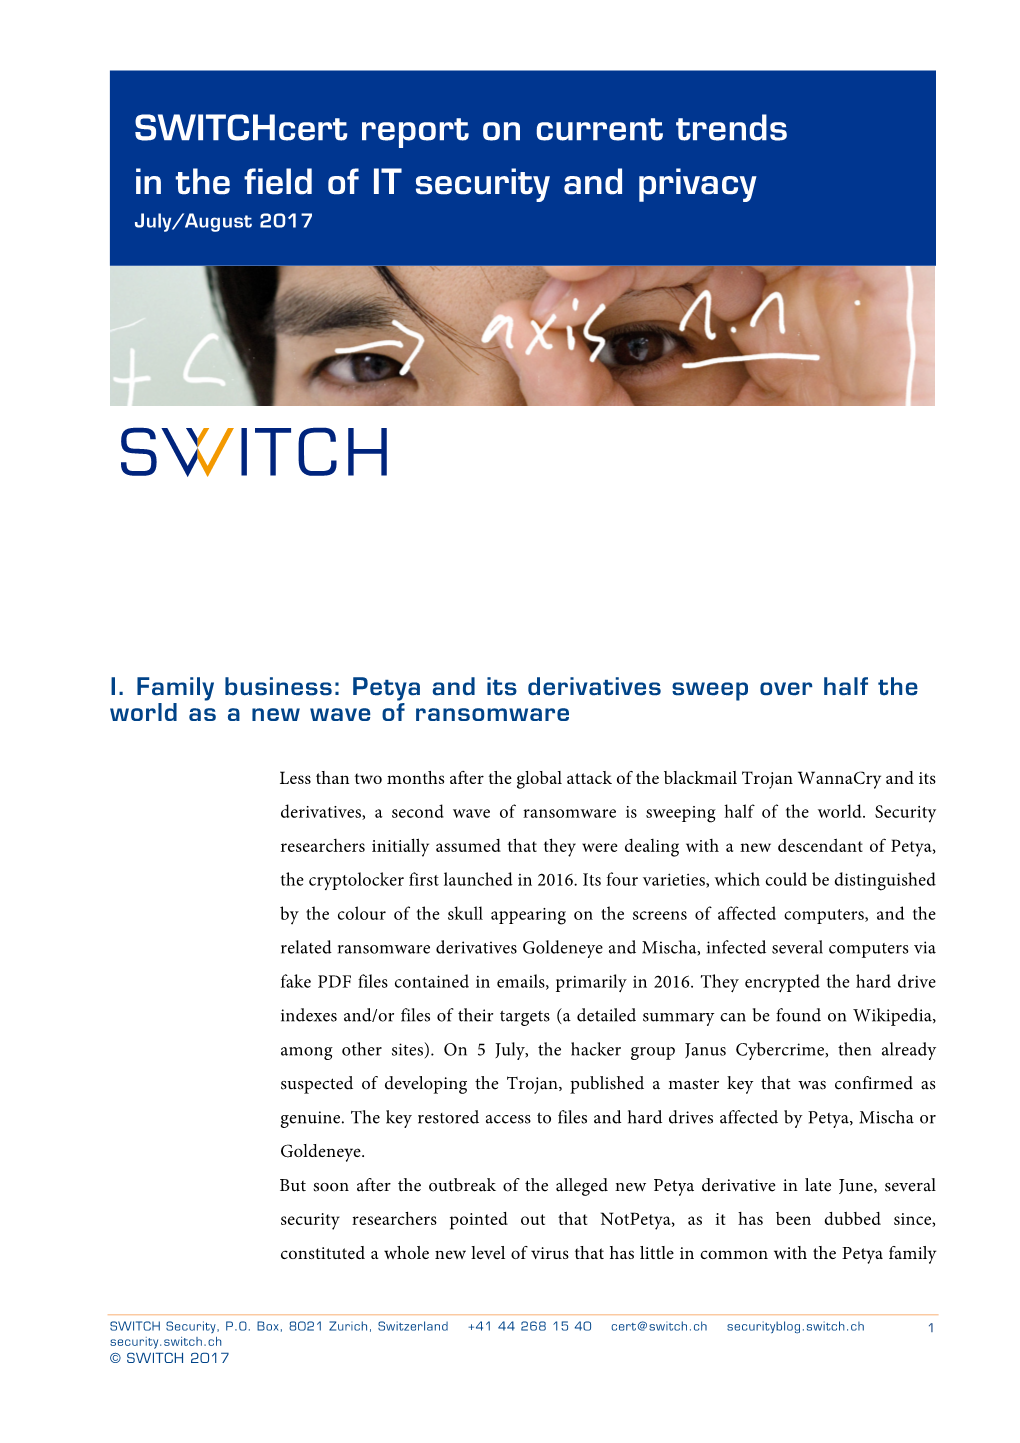 Switchcert Report on Current Trends in the Field of IT Security and Privacy July/August 2017